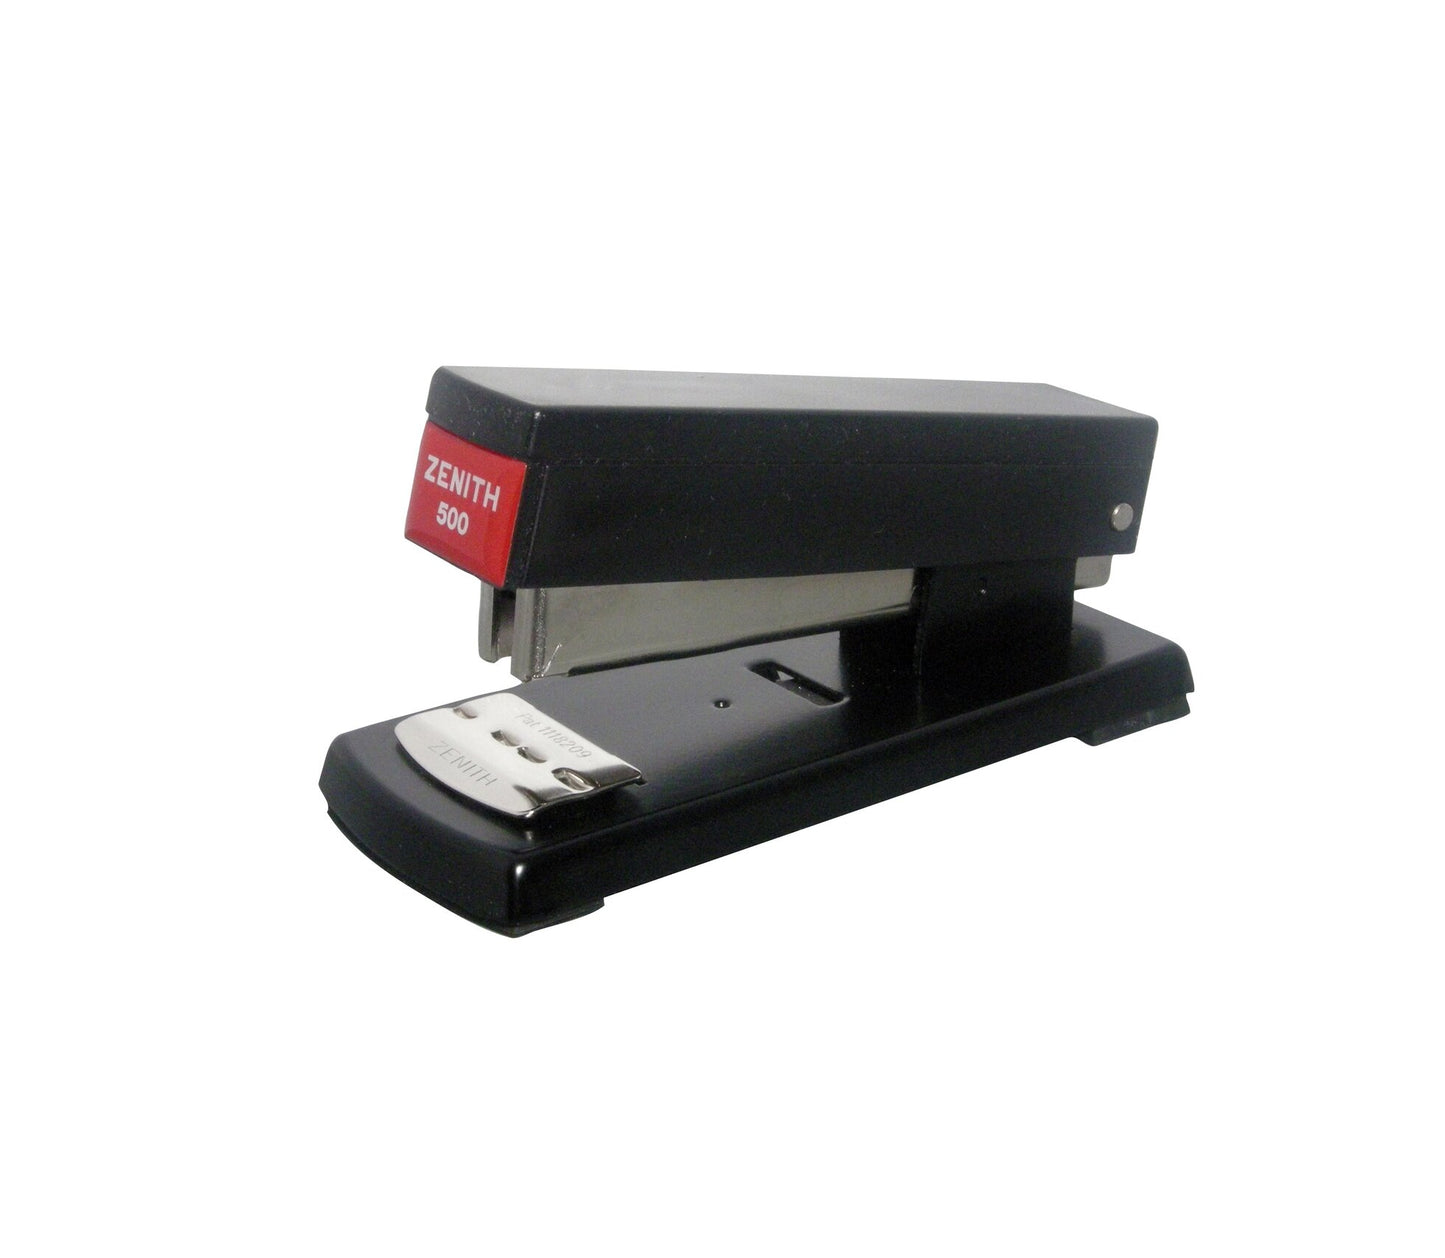 Zenith 500 N Stapler Black Made in Italy Angle View